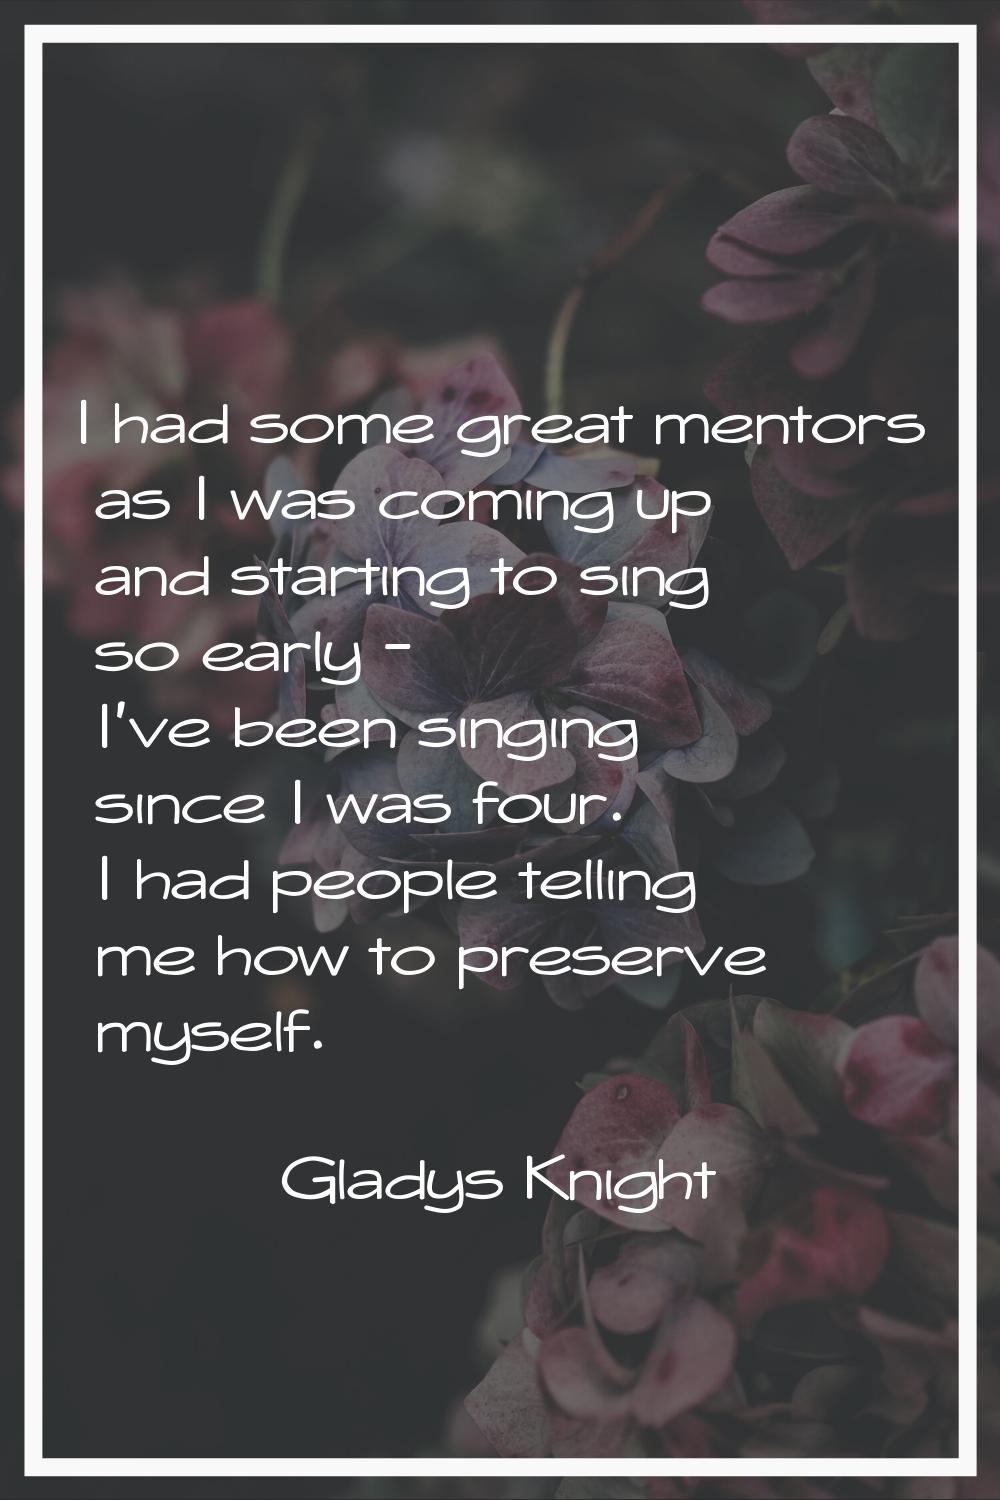 I had some great mentors as I was coming up and starting to sing so early - I've been singing since